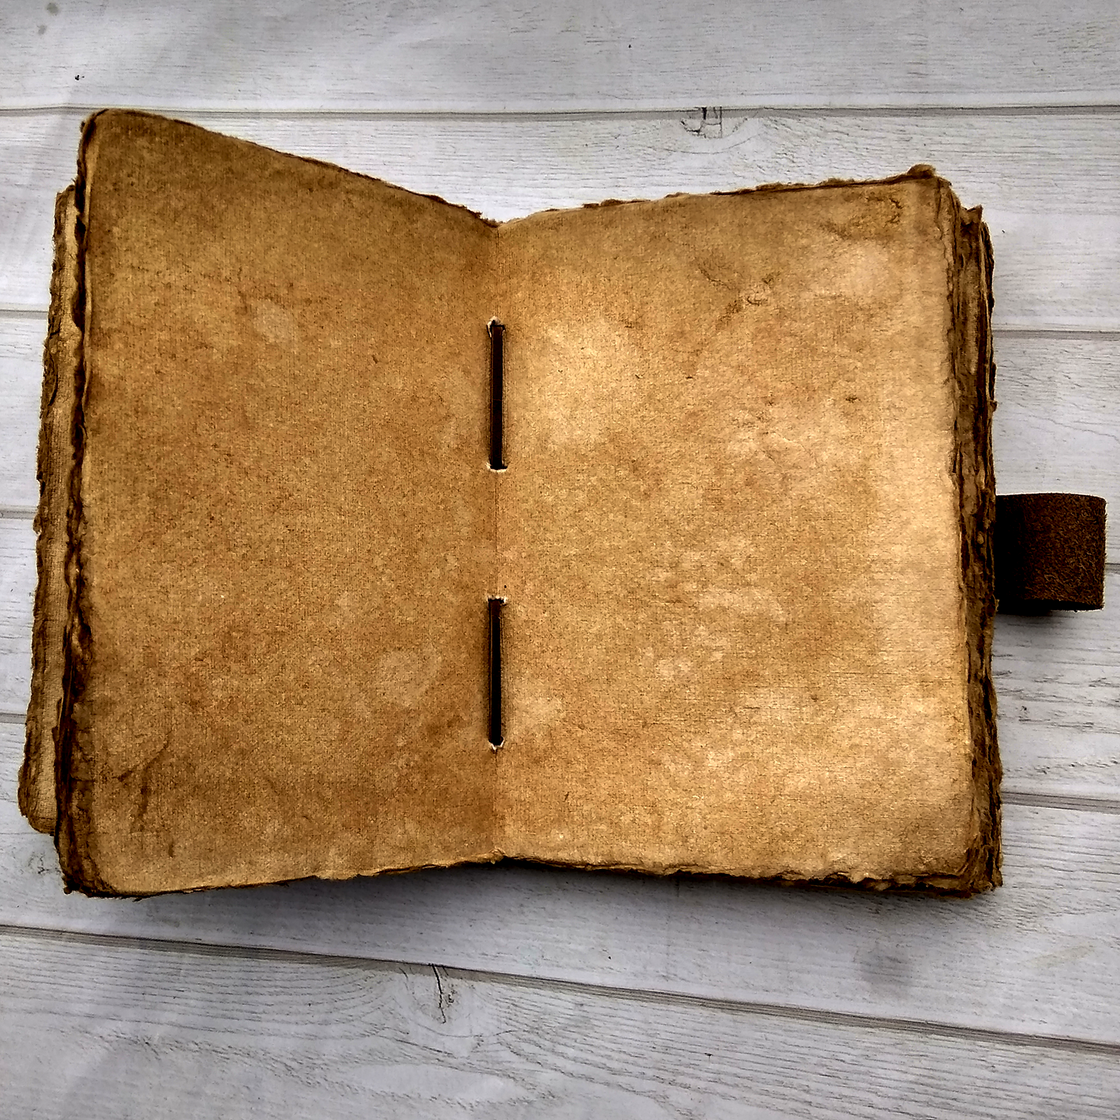 Leather Bound Journal - A5 Handmade Antique Deckle Edge Paper